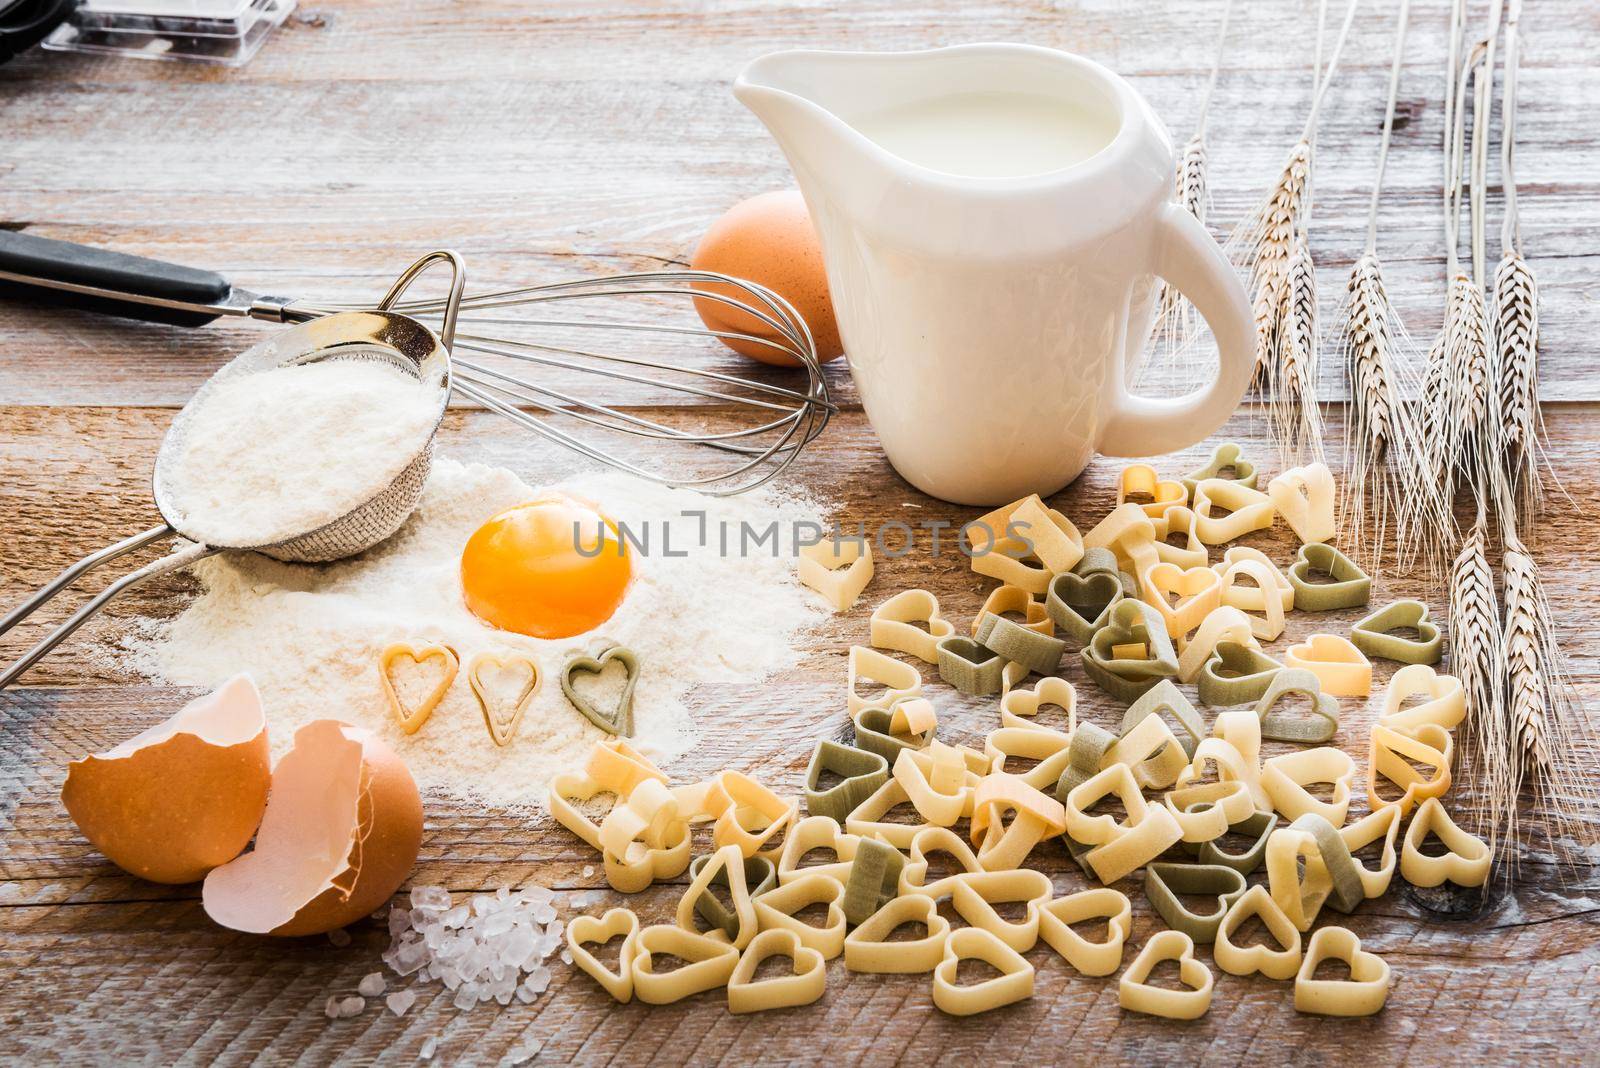 Heart shaped pasta and other products on a wooden textured table